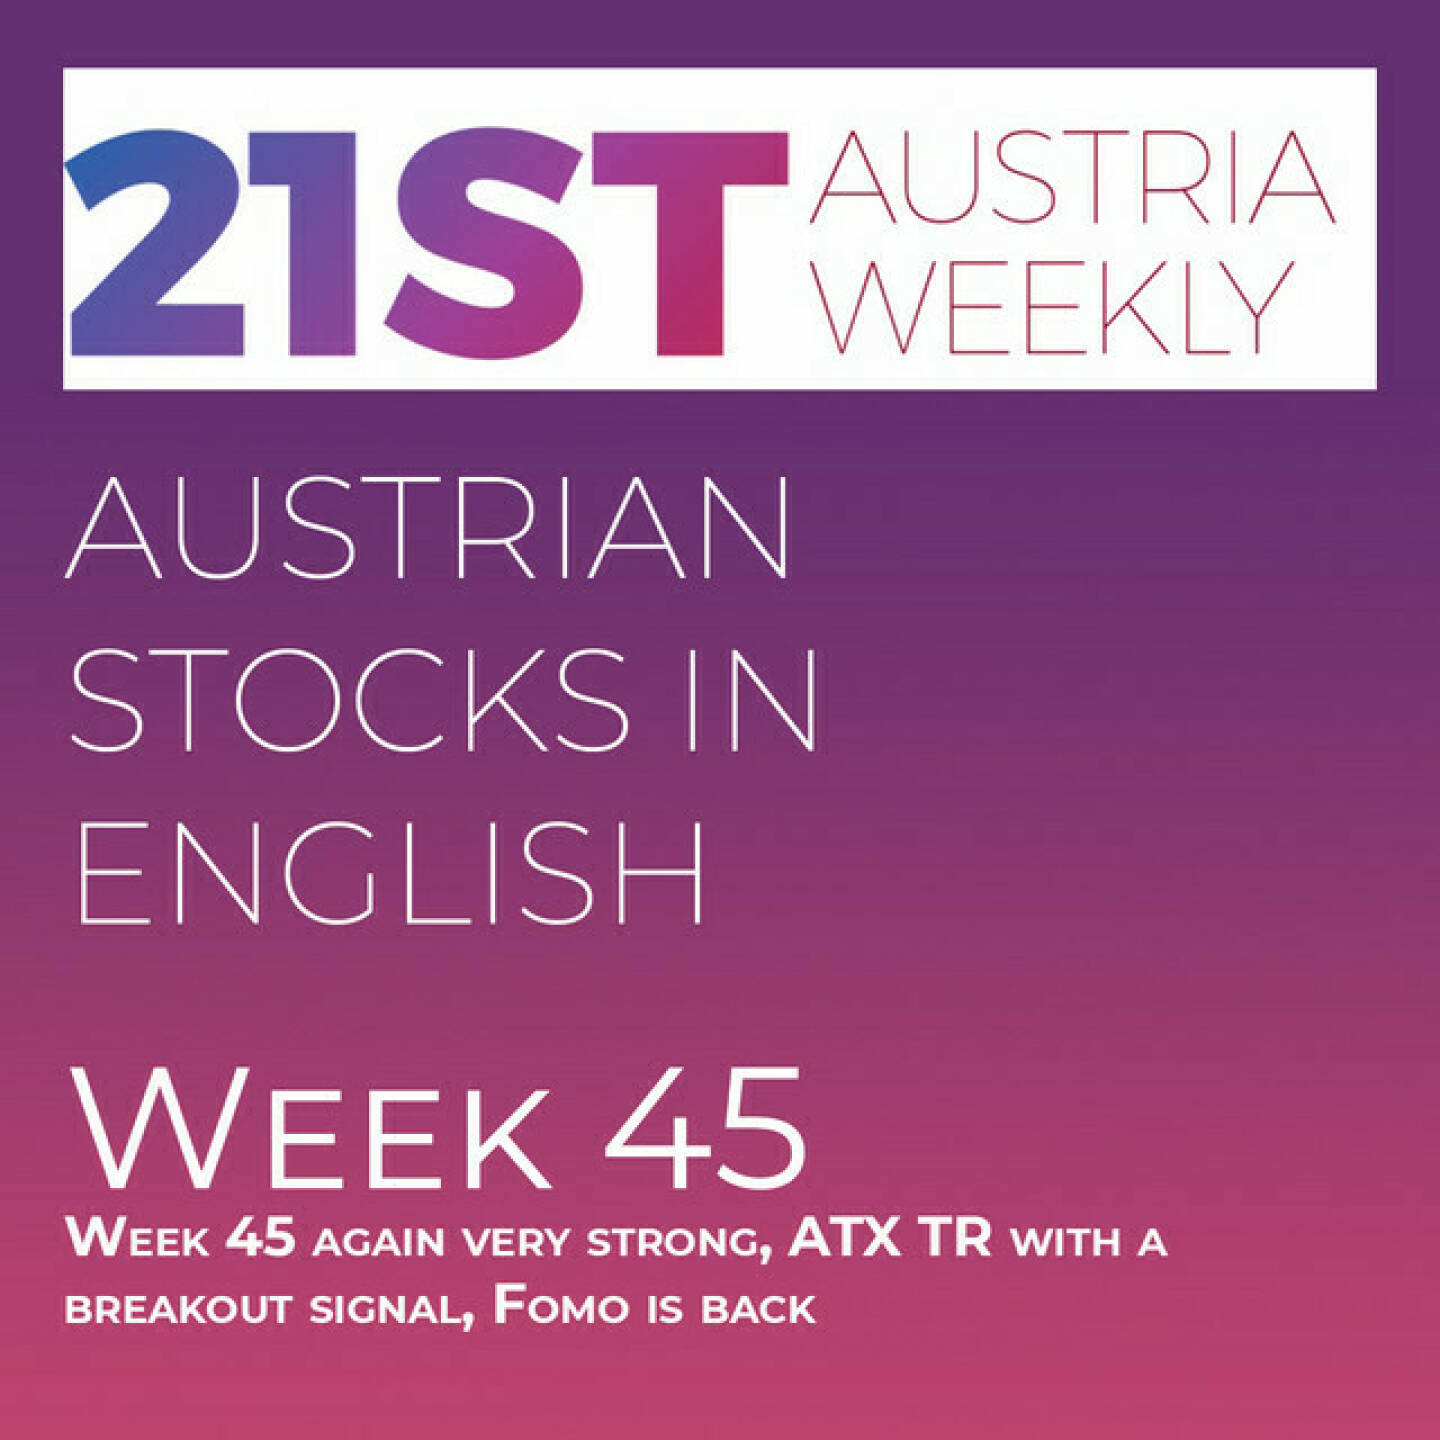 https://open.spotify.com/episode/5X3luUpnmjGe0xF6CYZSD0
Austrian Stocks in English: Week 45 again very strong, ATX TR with a breakout signal, Fomo is back - Welcome to &#34;Austrian Stocks in English - presented by Palfinger&#34;, the new and weekly english spoken Summary for the Austrian Stock Market, positioned every Sunday in the mostly german languaged Podcast &#34; Christian Drastil - Wiener Börse, Sport Musik und Mehr“ . <br/>Week 45 was another great week for ATX TR, which gained 3,6 percent, reaching the highest levels since June this year and is now trading above the moving average 200. We saw early sings of Fomo, the Fear of Missing Out Factor seems to be back.<br/>Lenzing was the best stock with 23 percent plus and the shares of Uniqa are now 14 days in a row up.<br/>News came from Erste Group, Rosenbauer, Vienna Airport, VIG, S Immo, voestalpine, FACC, Addiko, Wienerberger, Polytec Post and Zumtobel and are spoken by Allison.<br/>Please rate my Podcast on Apple Podcasts (or Spotify): https://podcasts.apple.com/at/podcast/christian-drastil-wiener-borse-sport-musik-und-mehr-my-life/id1484919130 .